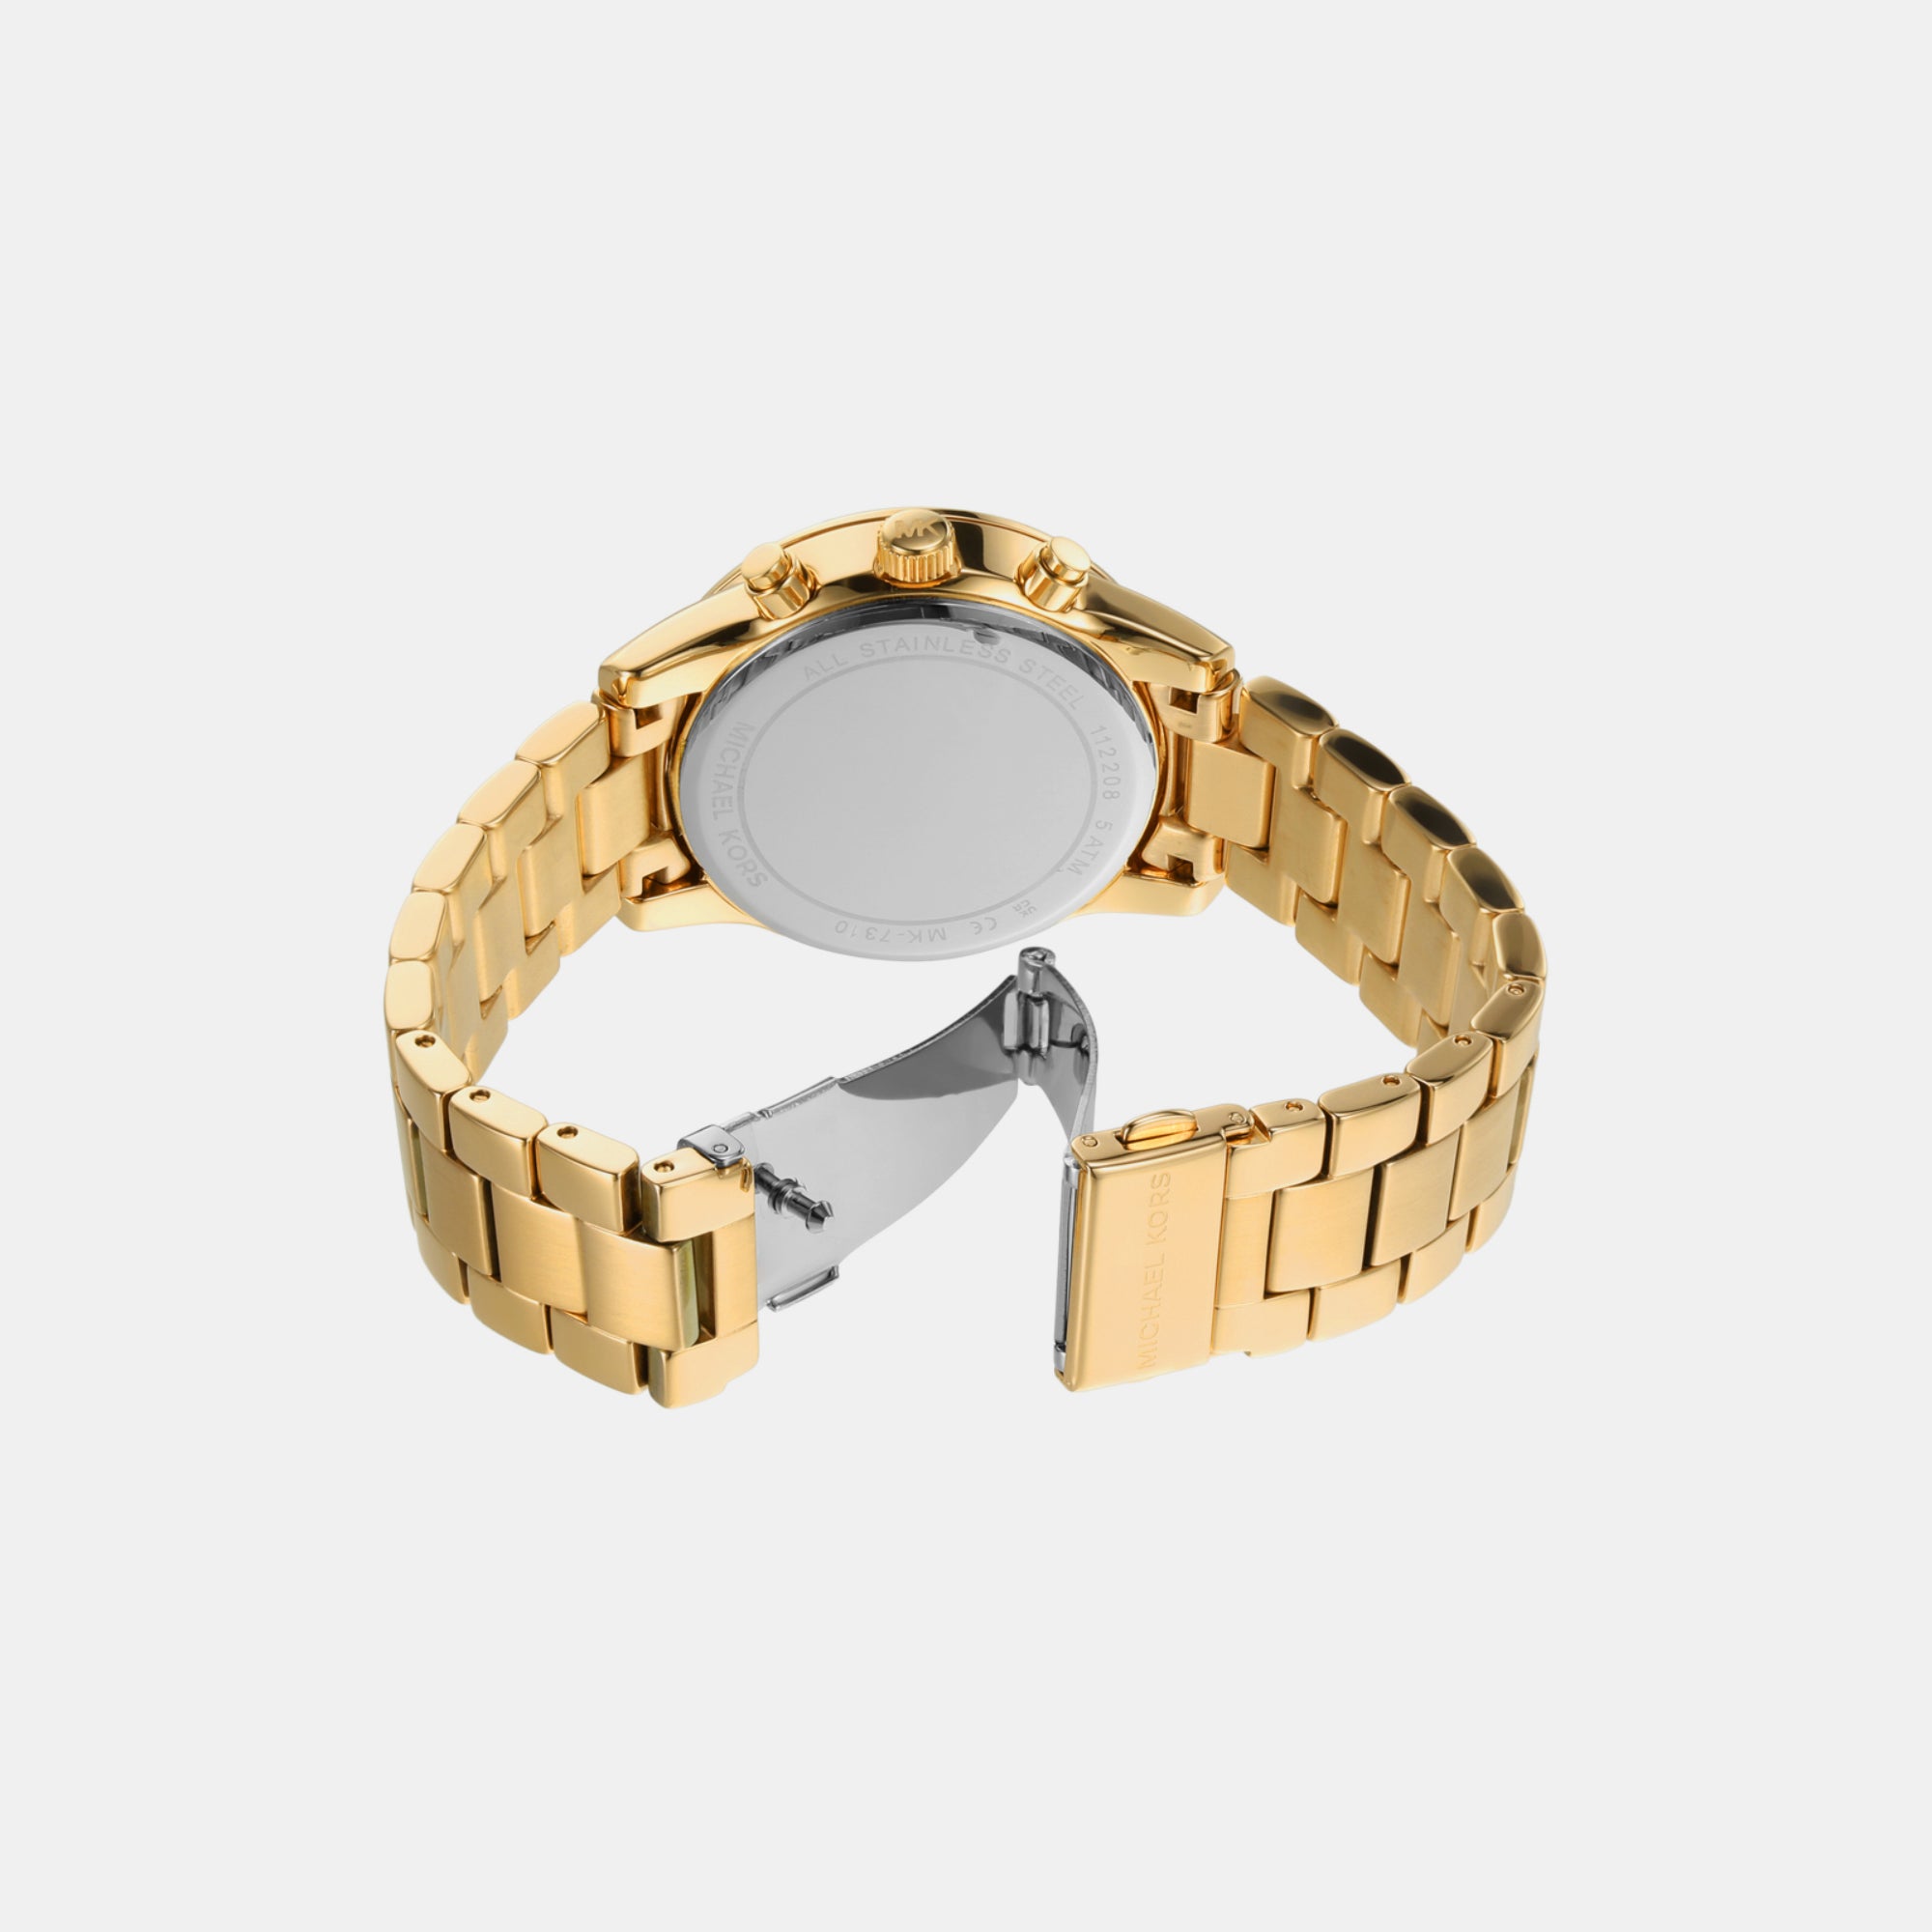 Female Gold Chronograph Stainless Steel Watch MK7310 – Just In Time